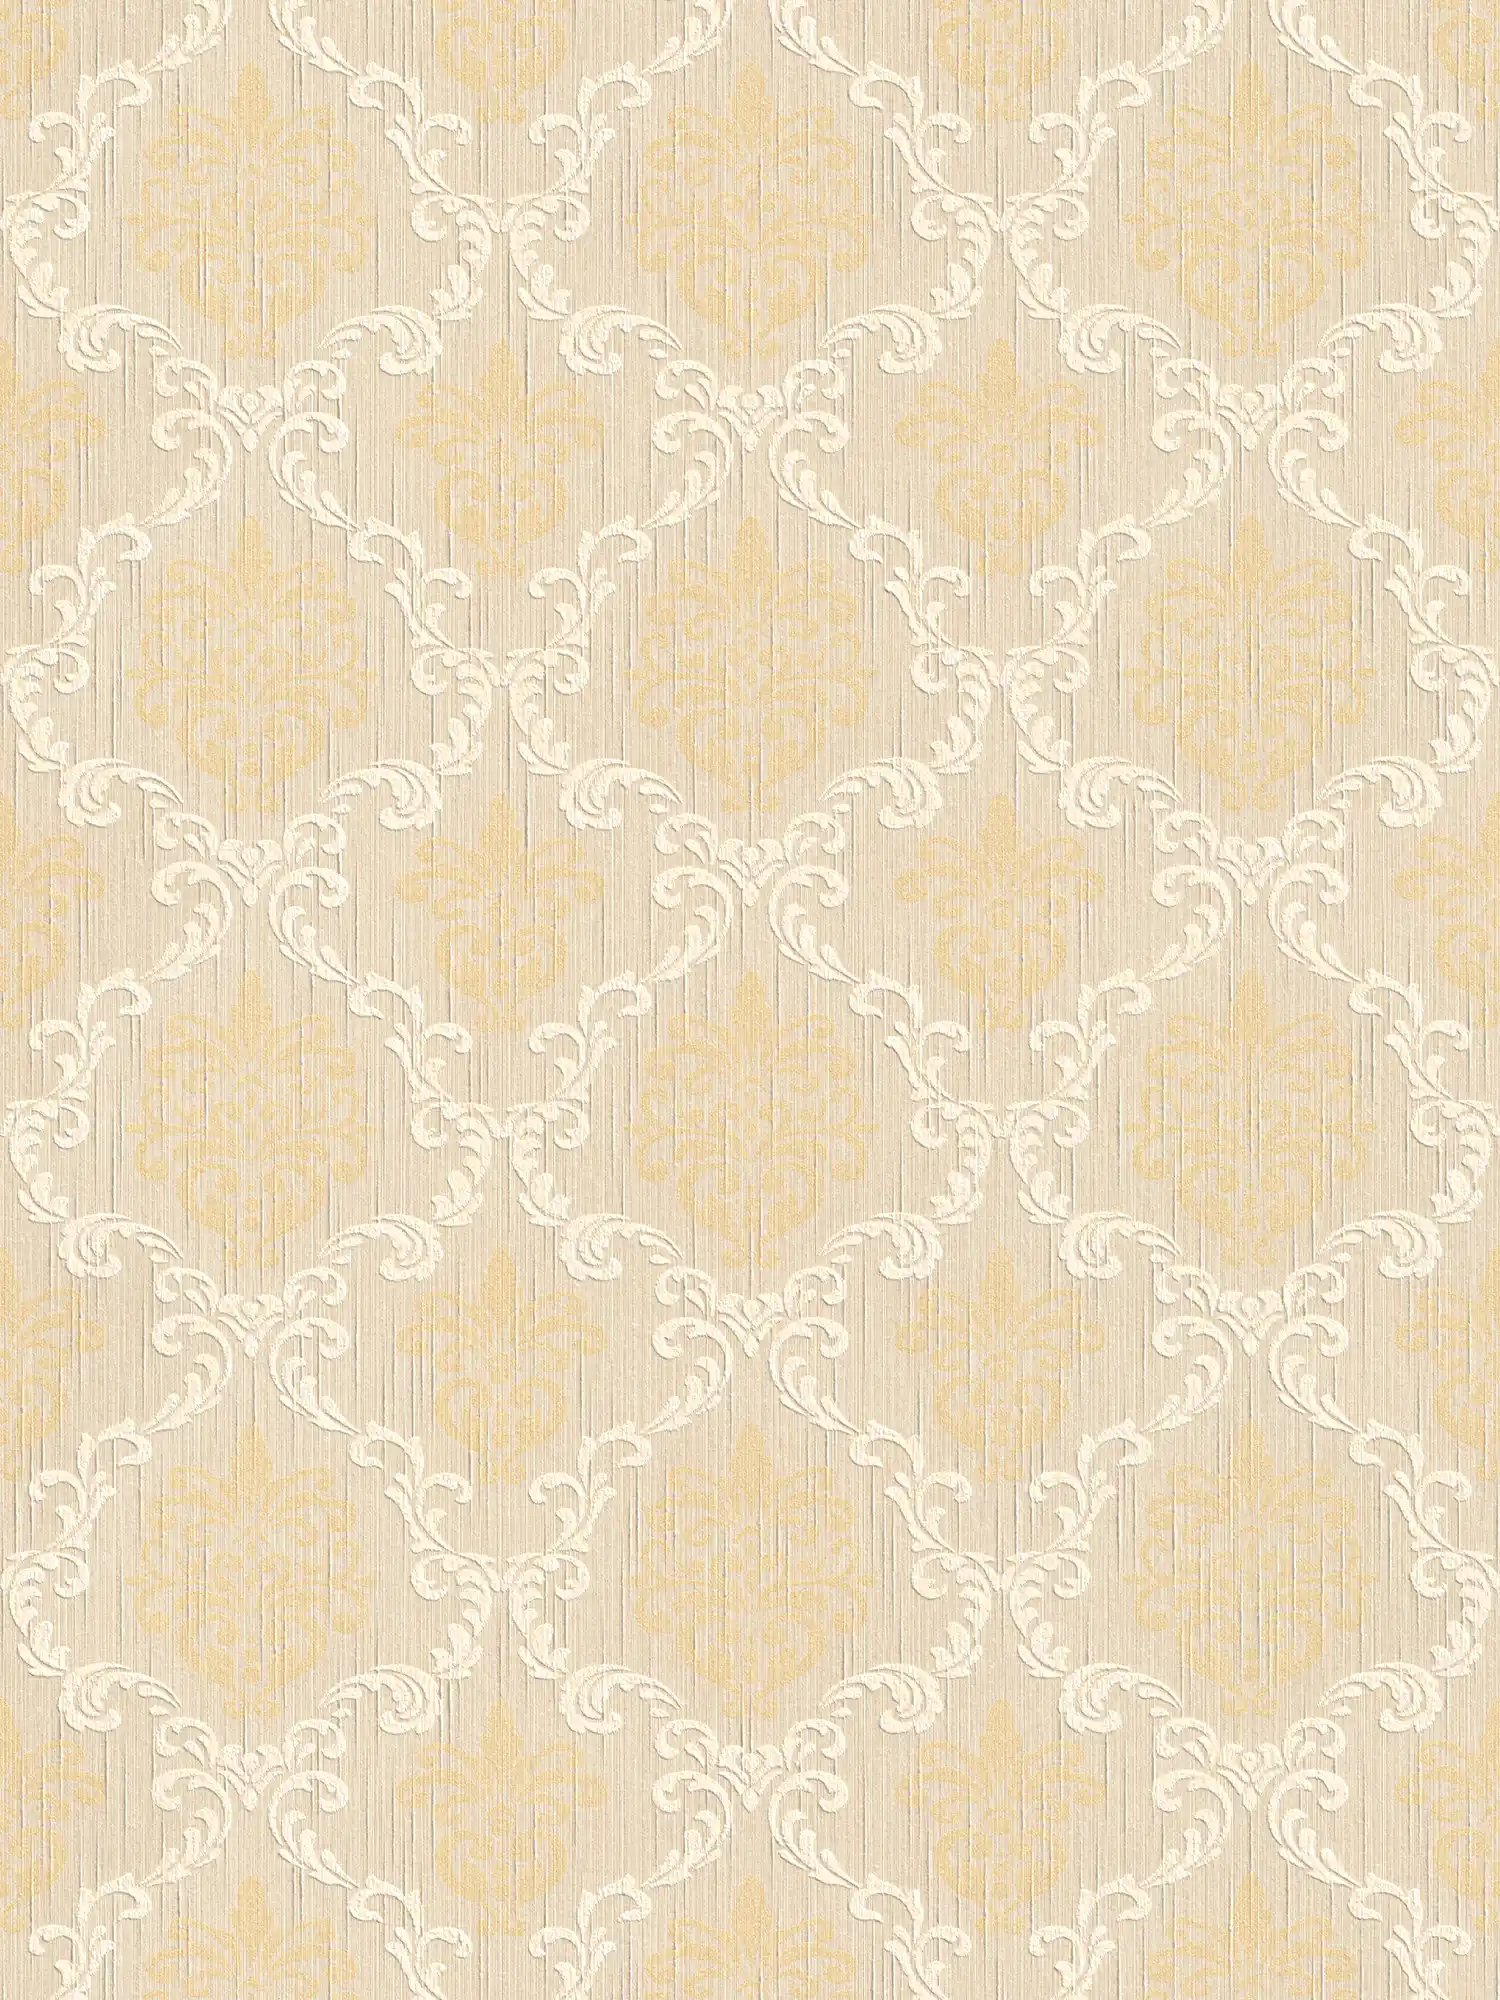 Wallpaper with ornament design in colonial style - beige
